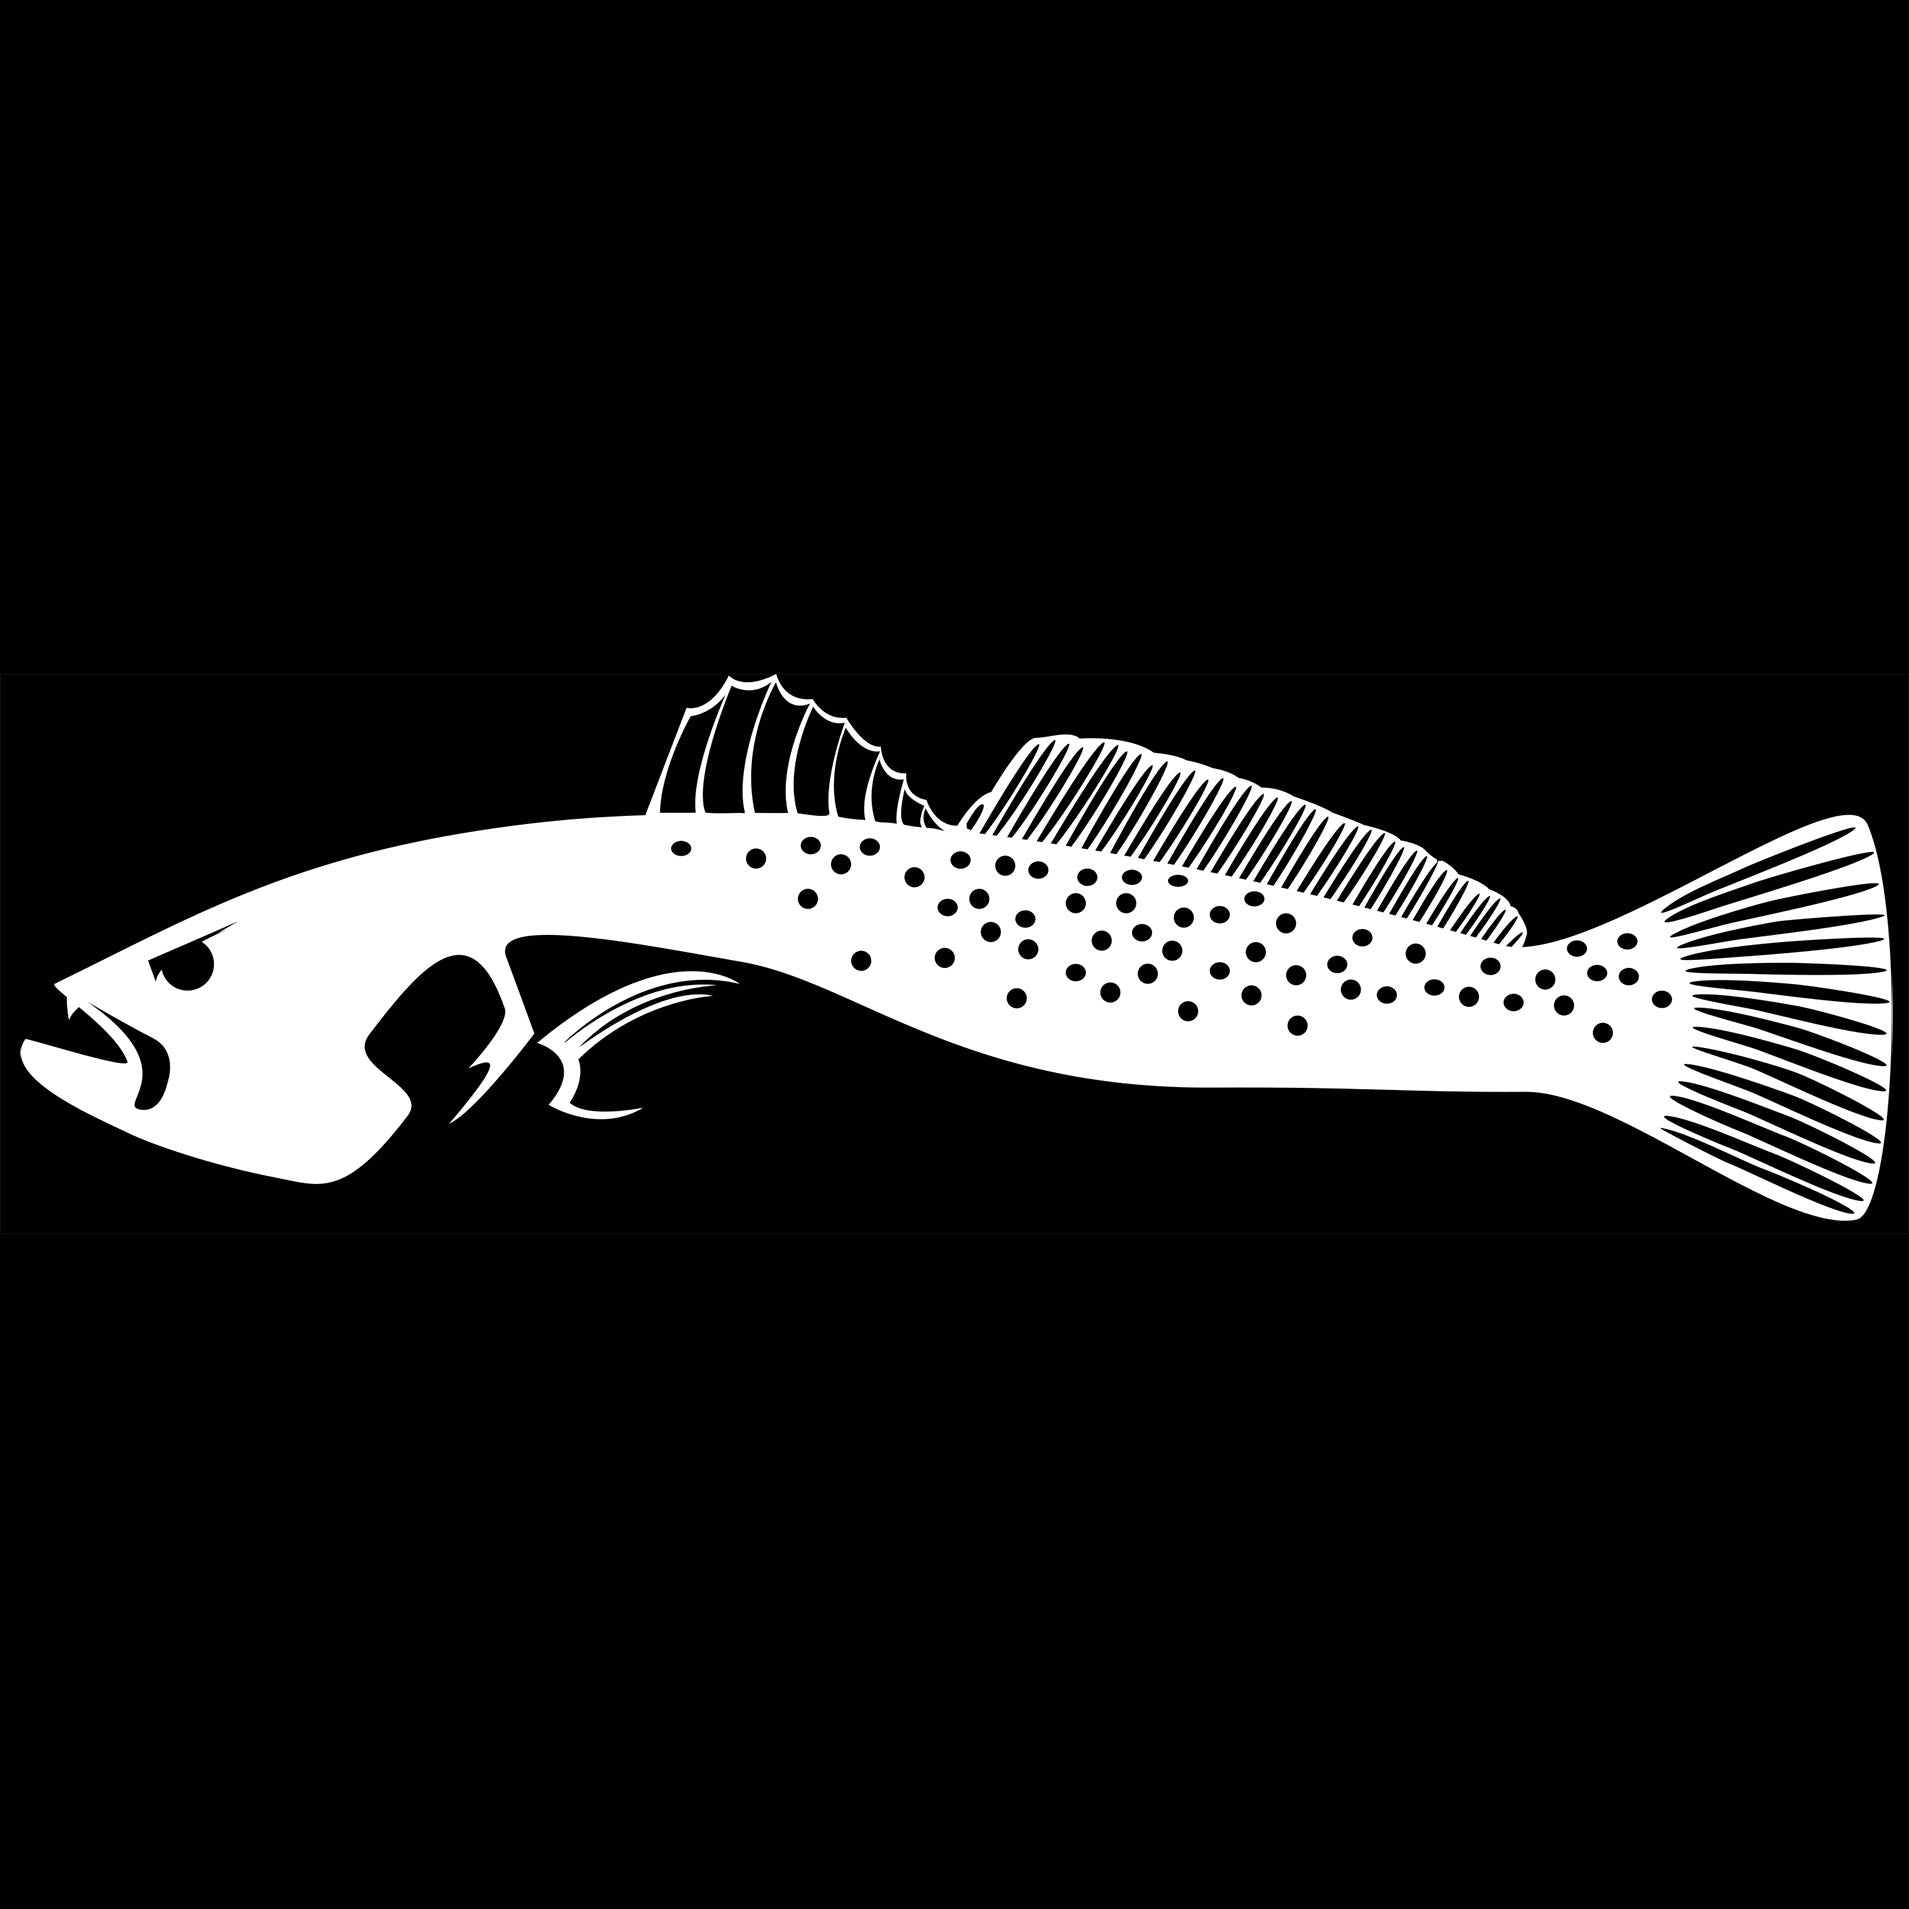 Skiff Life Sea Trout Fishing Stickers - Seatrout UV Protected Car Decals  Waterproof Fish Stickers Yeti Decals for Boat Kayak Truck Yeti Tumbler Car